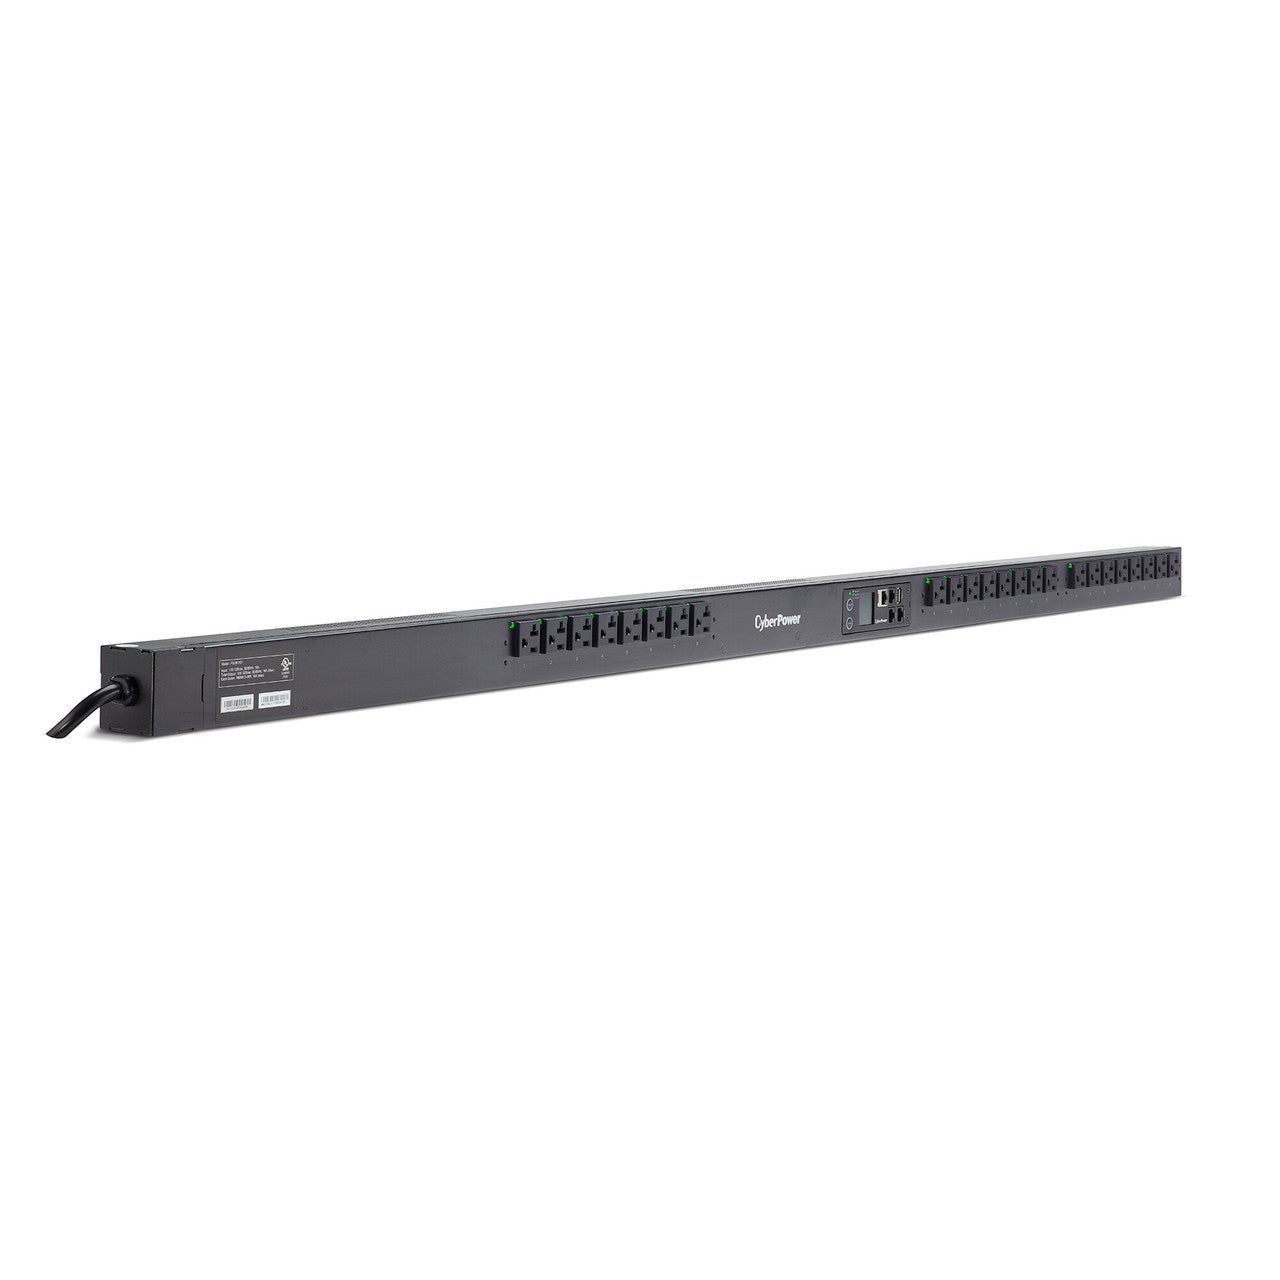 CyberPower PDU41101 Switched PDU 20A SNMP (L)5-20P Input 120V (24) NEMA5-20R Outlets 10ft Cord 3Yr Wty